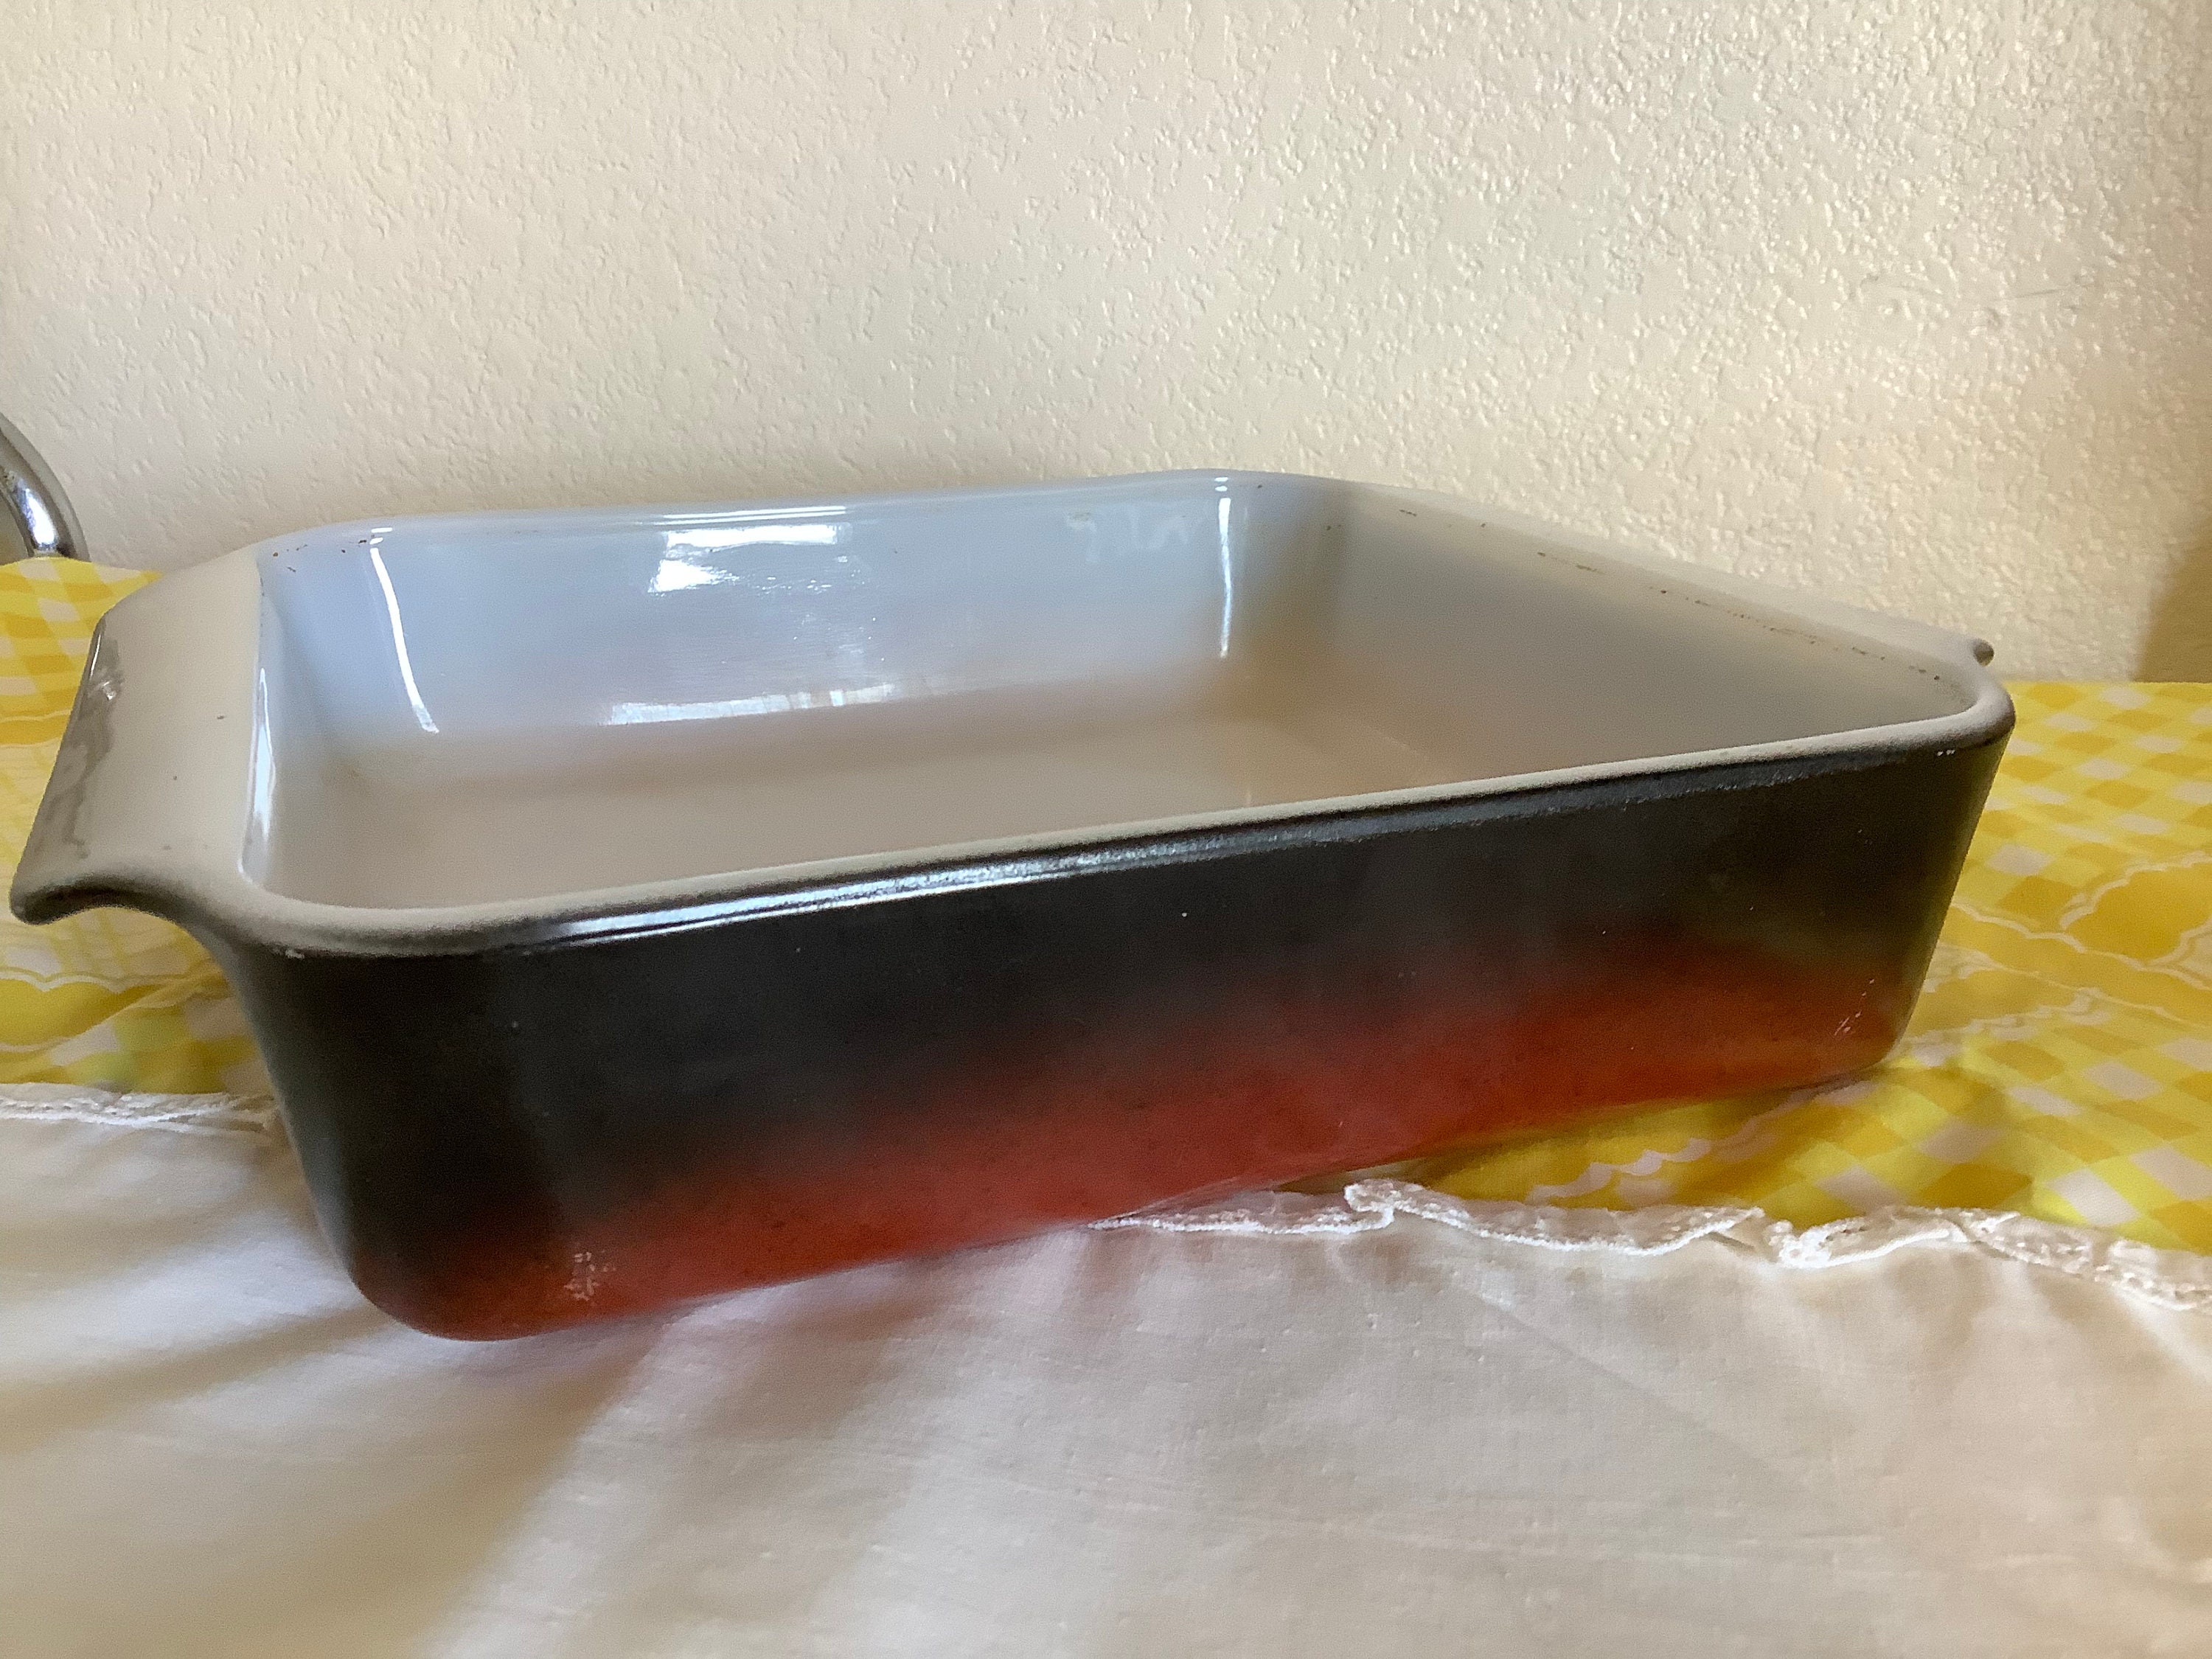 8 Cobalt Blue Vintage Anchor Hocking Brownie Baking Dish Cake Pan With  Thick Walls and Handles 8 X 8 X 2 1035 or Casserole Dish Side Dish 